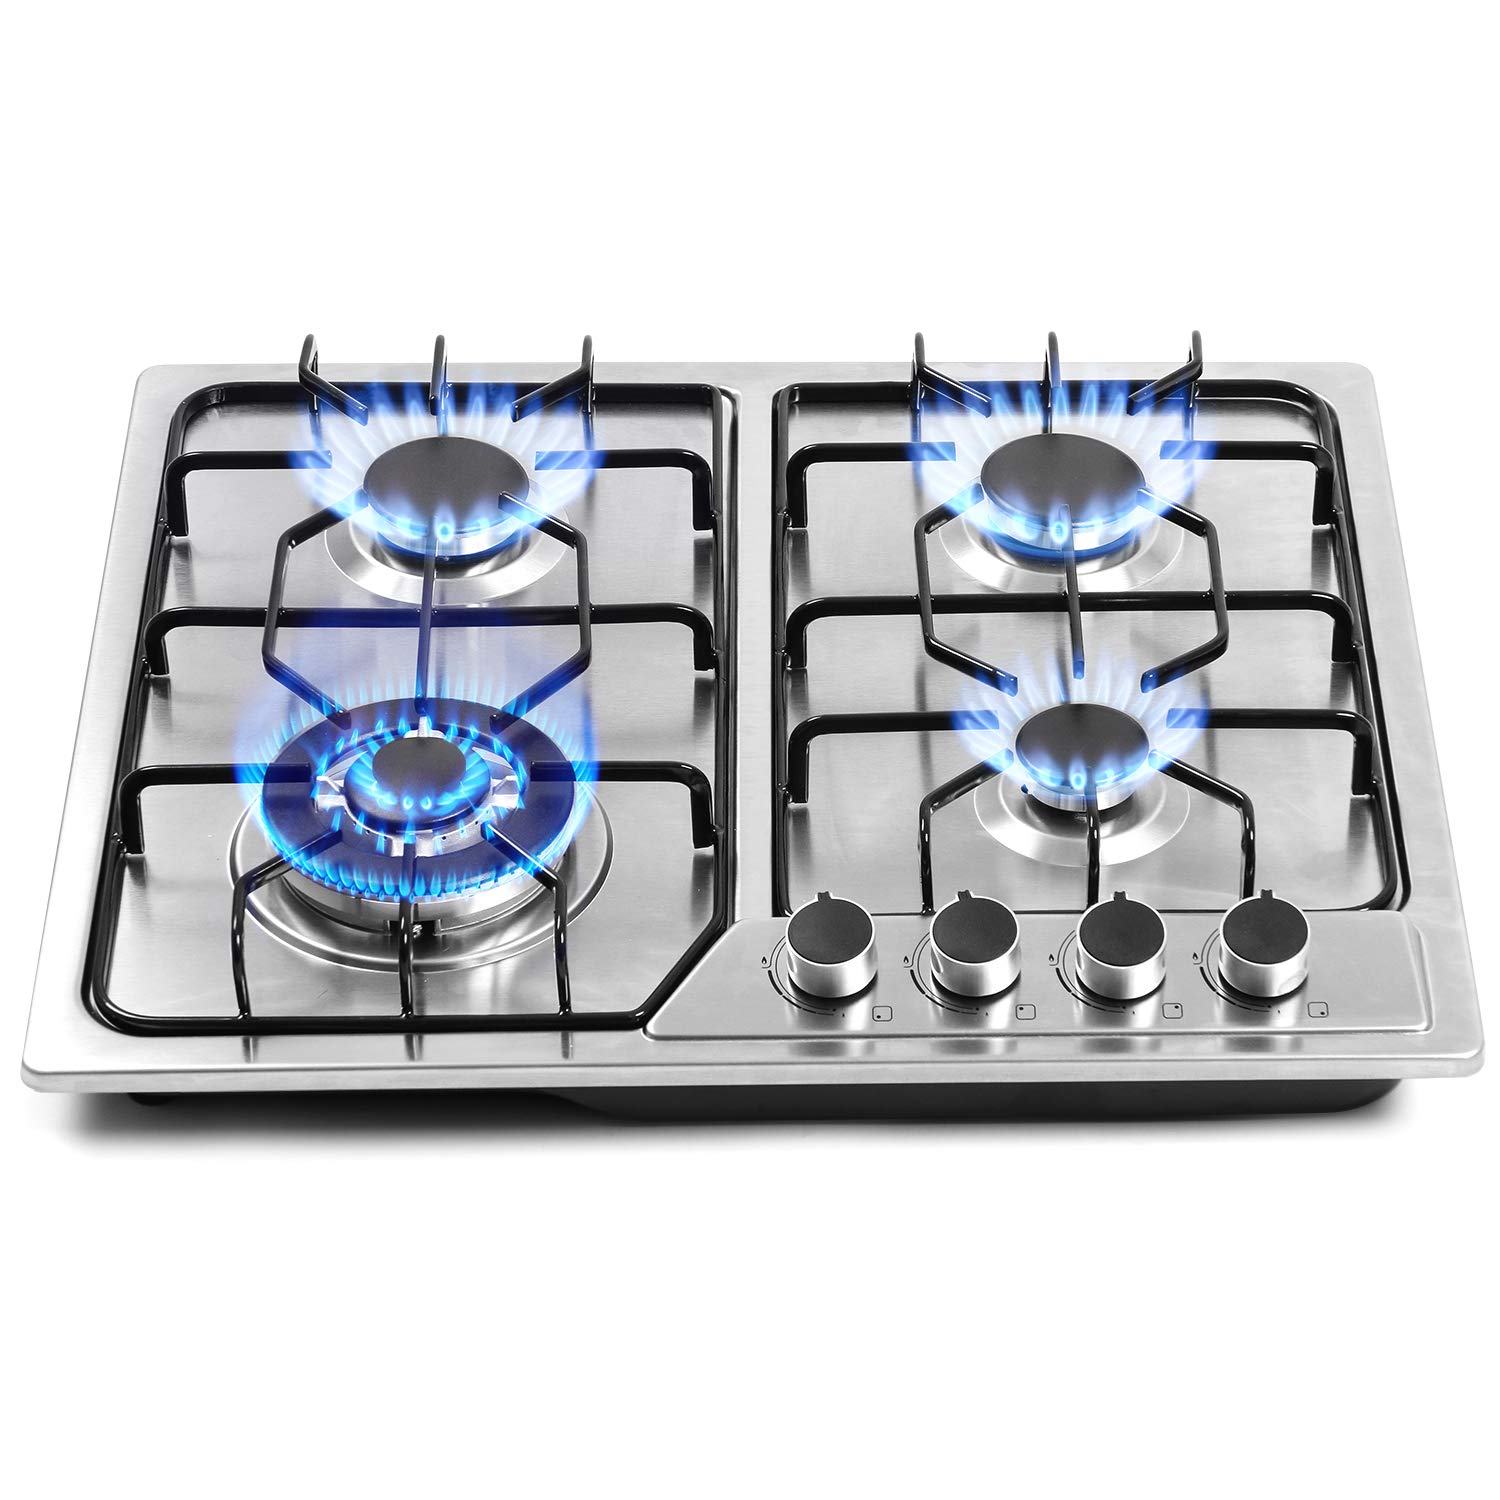 Forimo 22"x20" Built-in Gas Cooktop